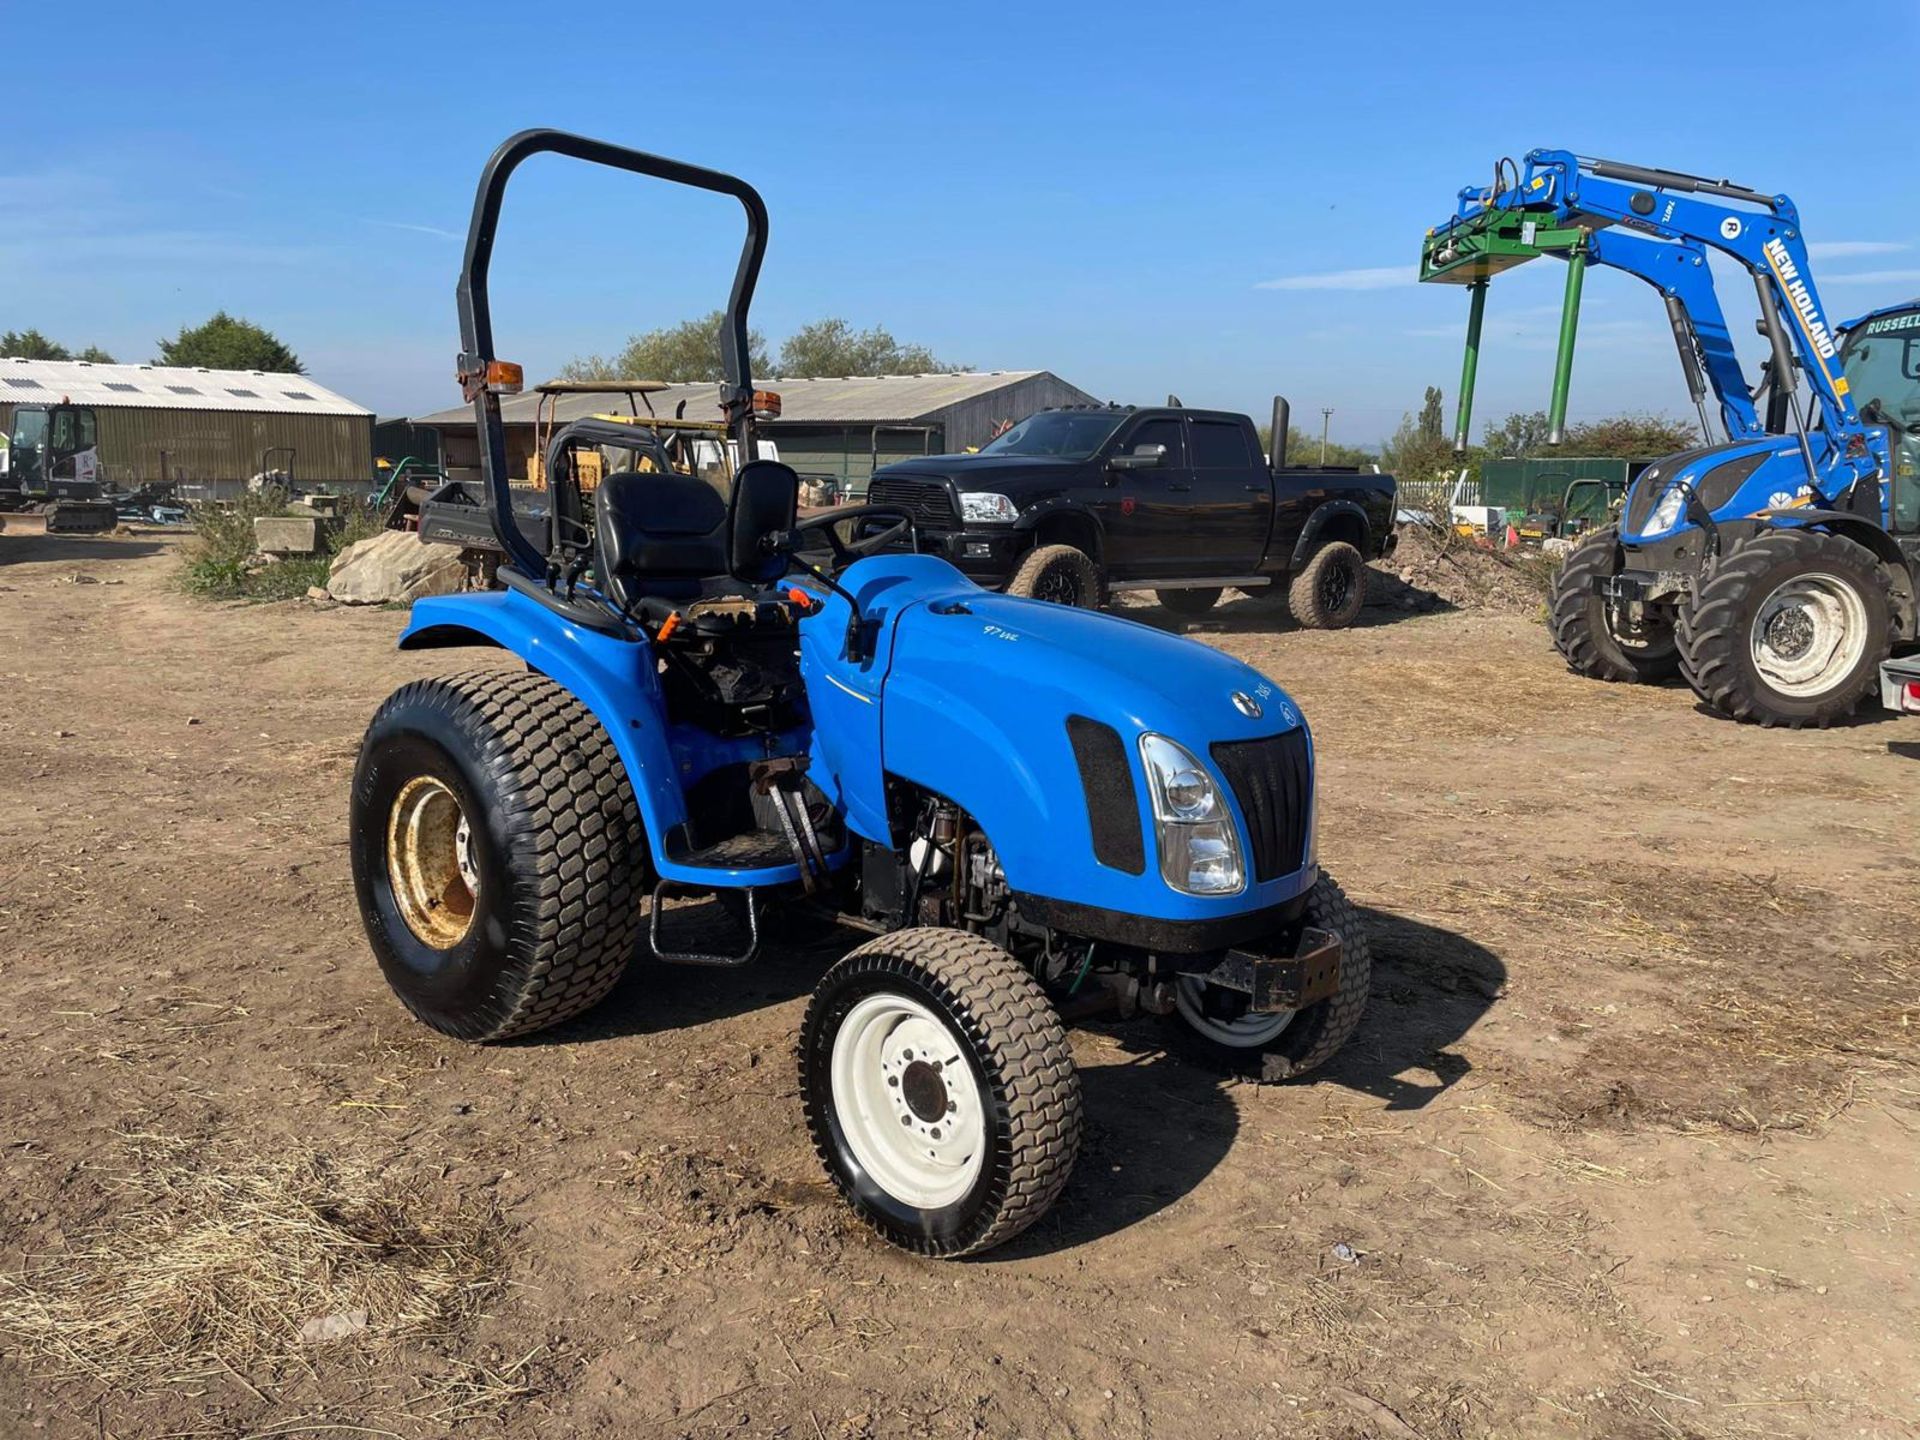 2005 NEW HOLLAND TC27DA 27hp 4WD COMPACT TRACTOR, RUNS DRIVES AND WORKS WELL, ROAD REGISTERED - Image 2 of 13